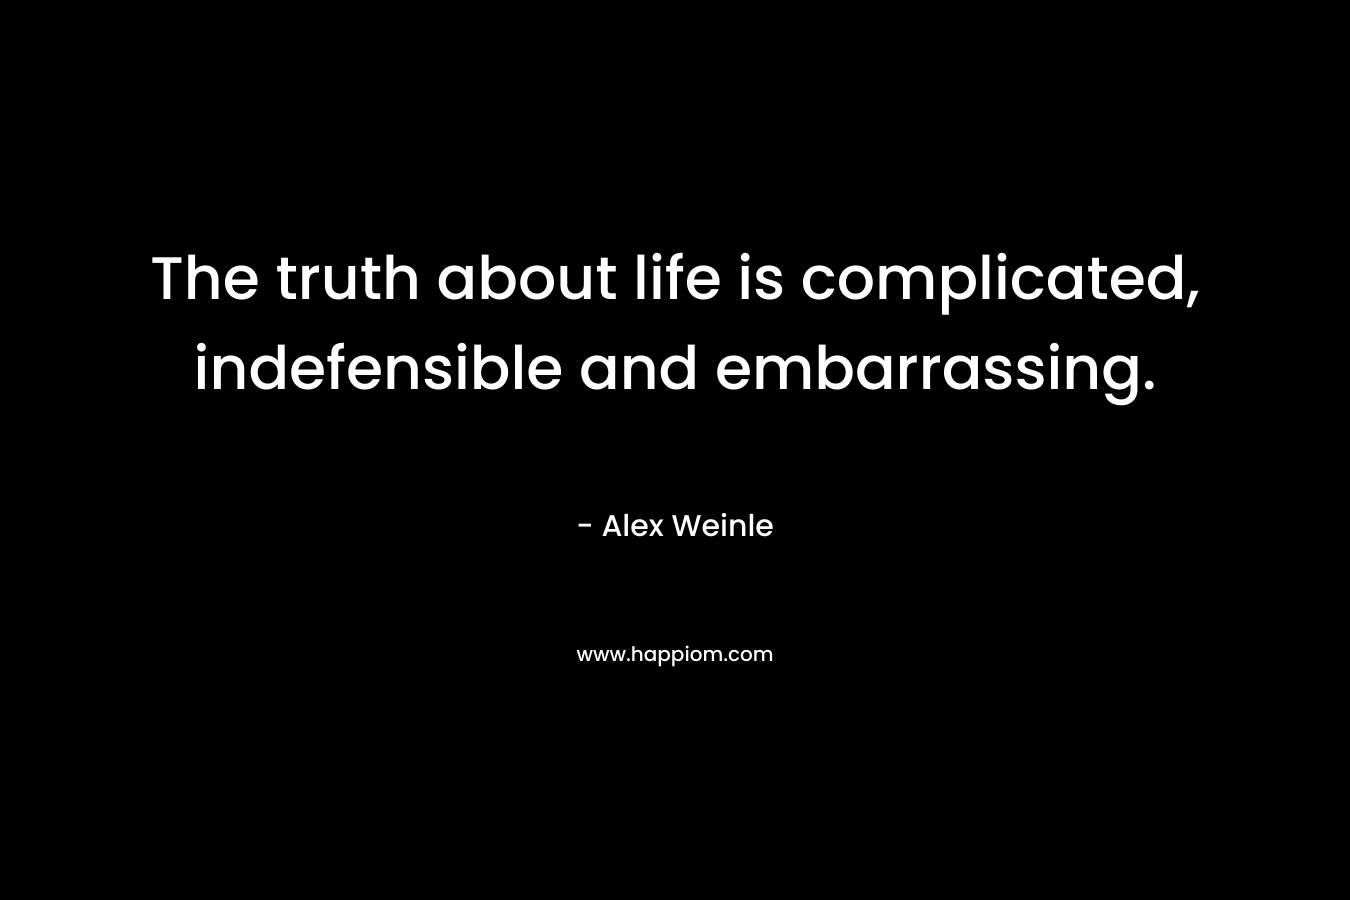 The truth about life is complicated, indefensible and embarrassing. – Alex Weinle